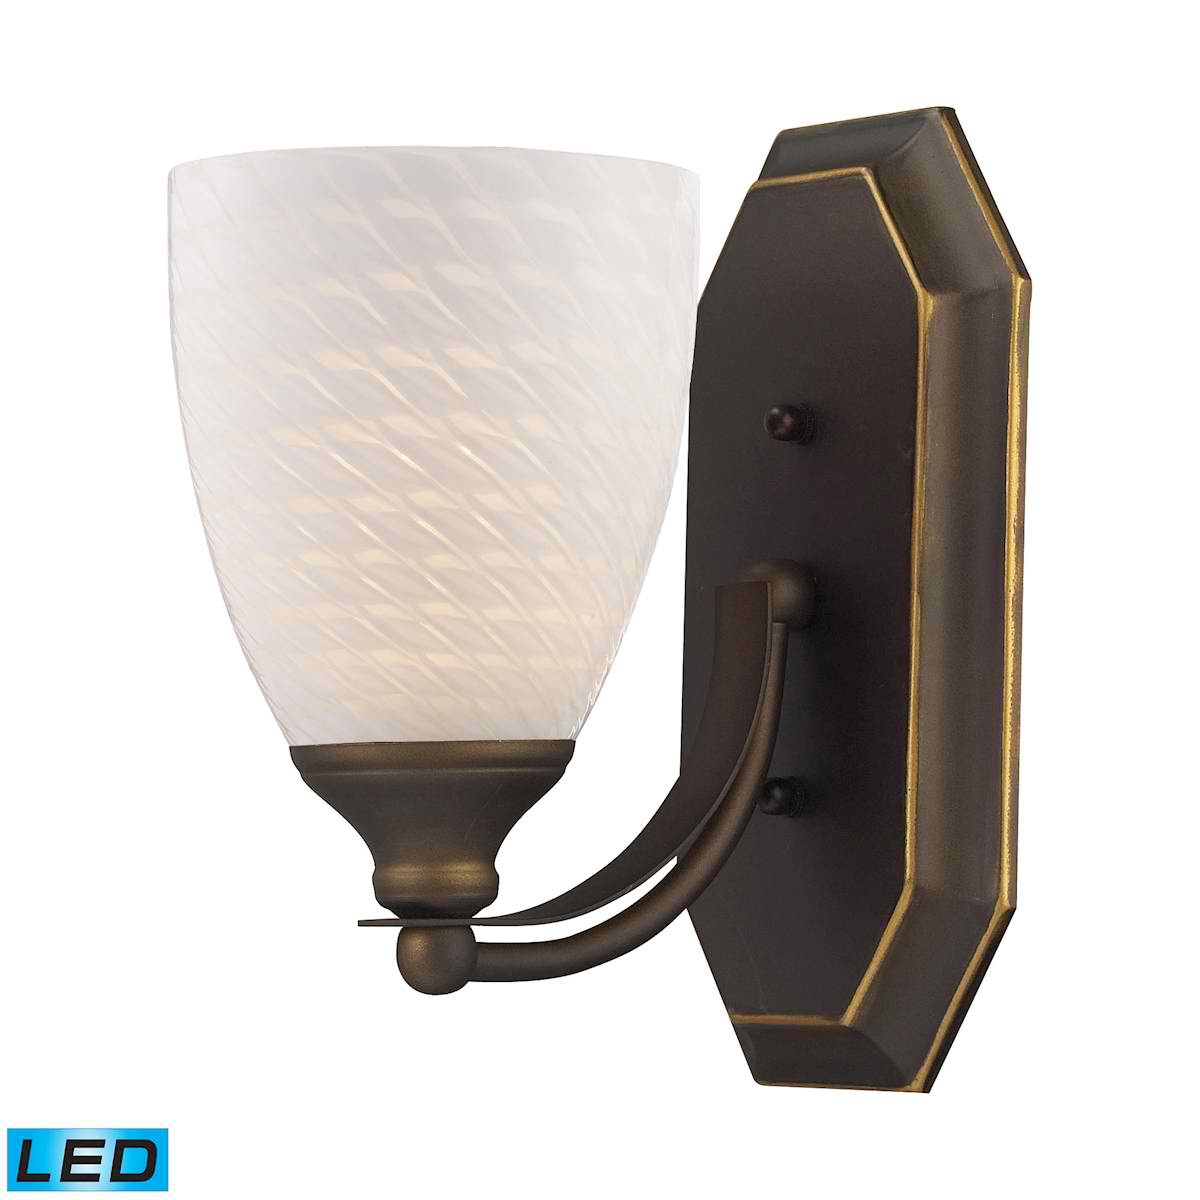 1 Light Vanity in Aged Bronze and White Swirl Glass - LED Offering Up To 800 Lumens (60 Watt Equivalent)